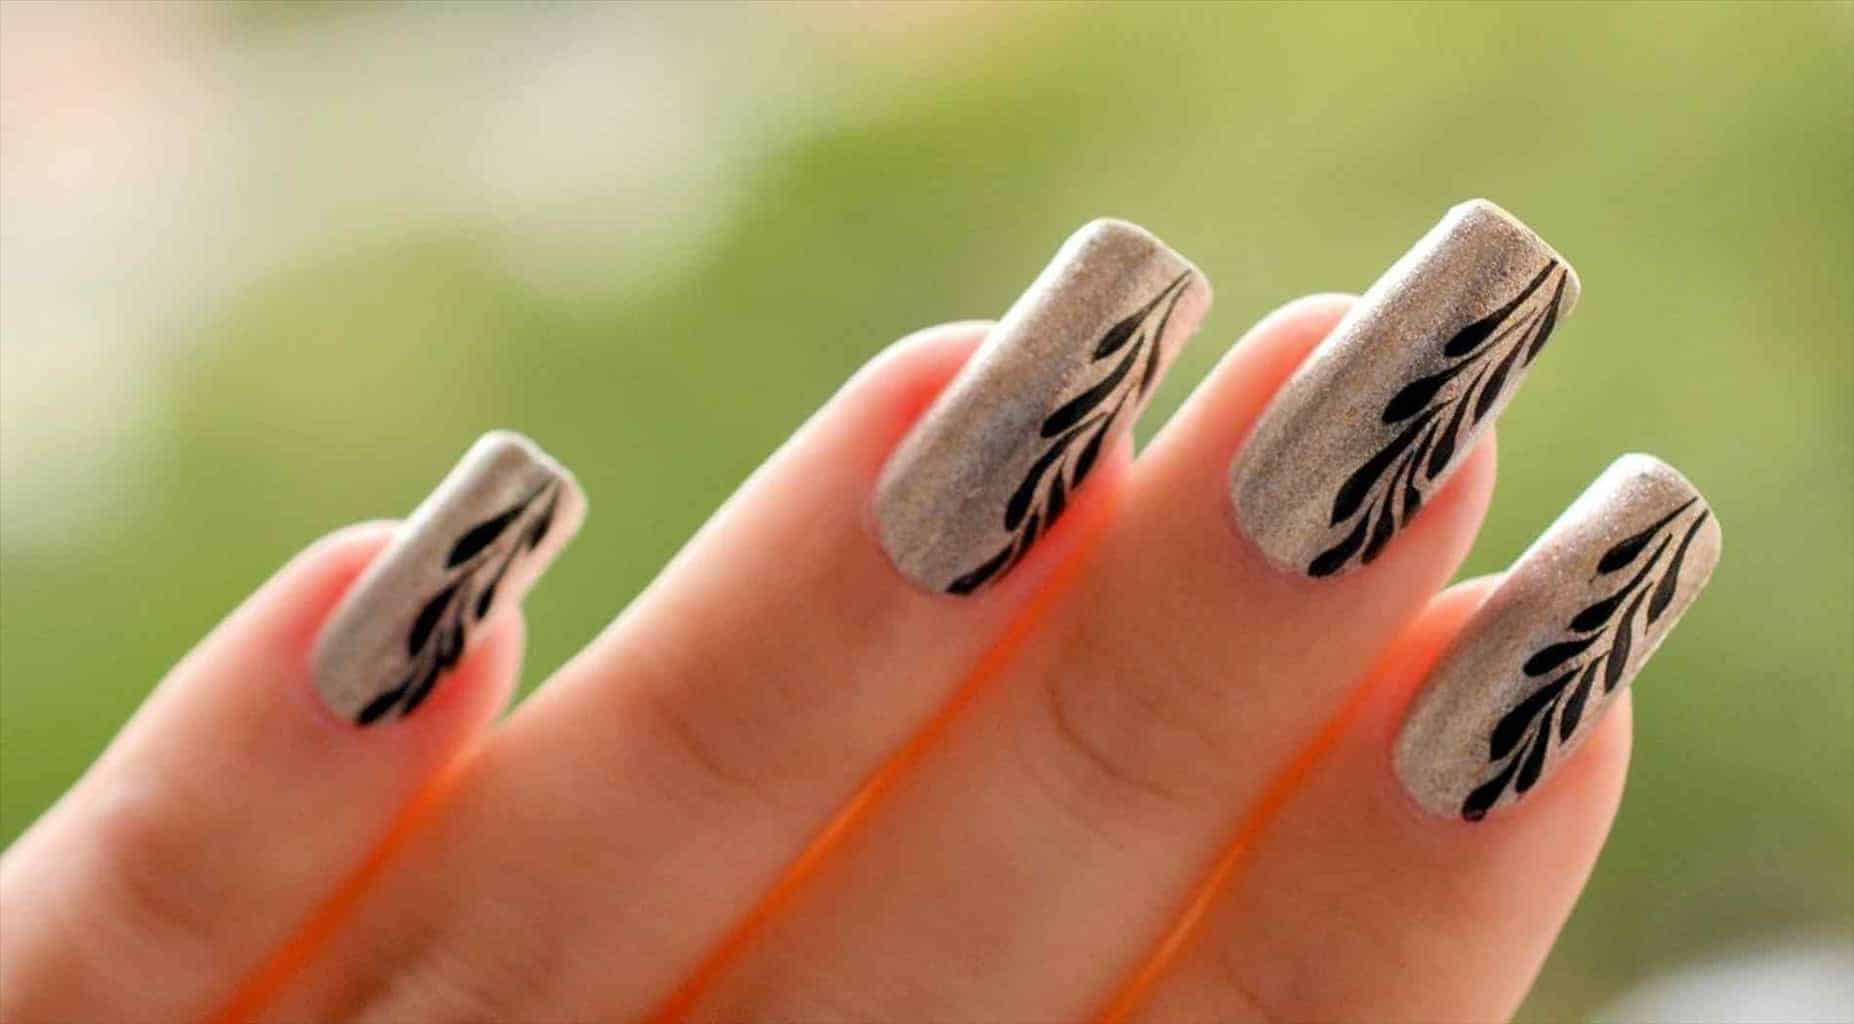 2. 10 Easy Nail Art Designs for Beginners: The Ultimate Guide - wide 1